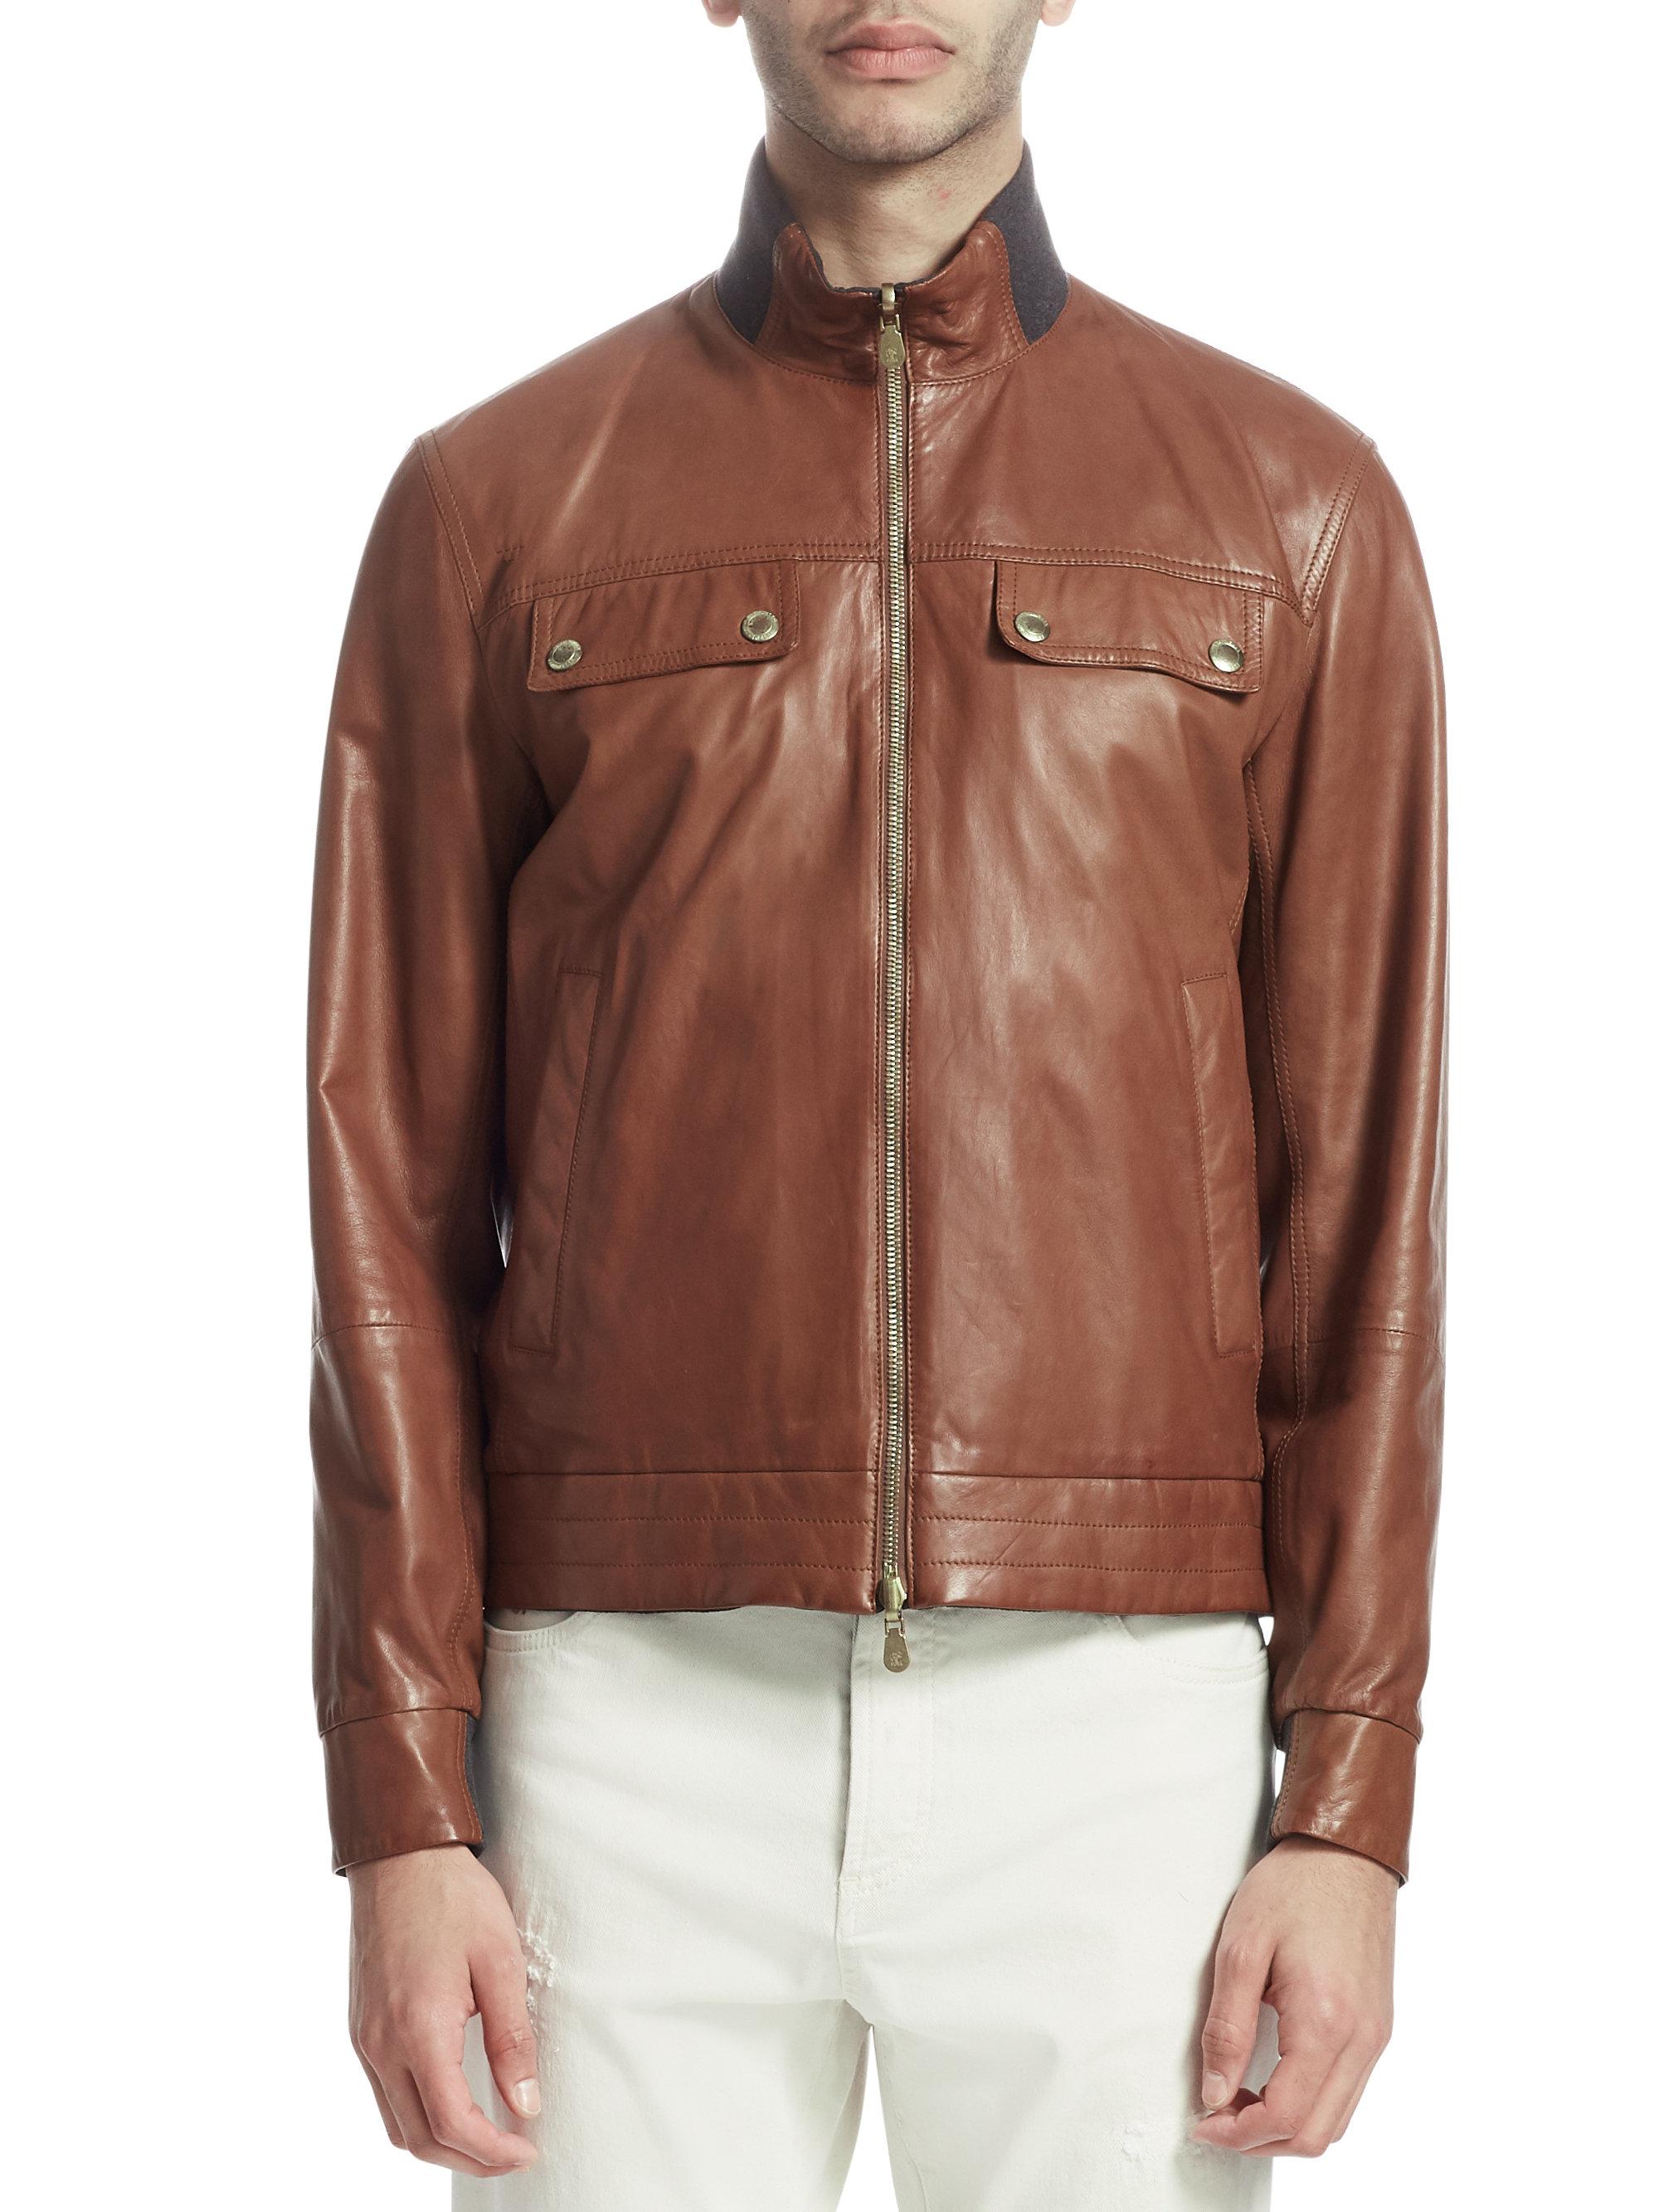 Brunello Cucinelli Reversible Leather Jacket in Brown for Men - Lyst